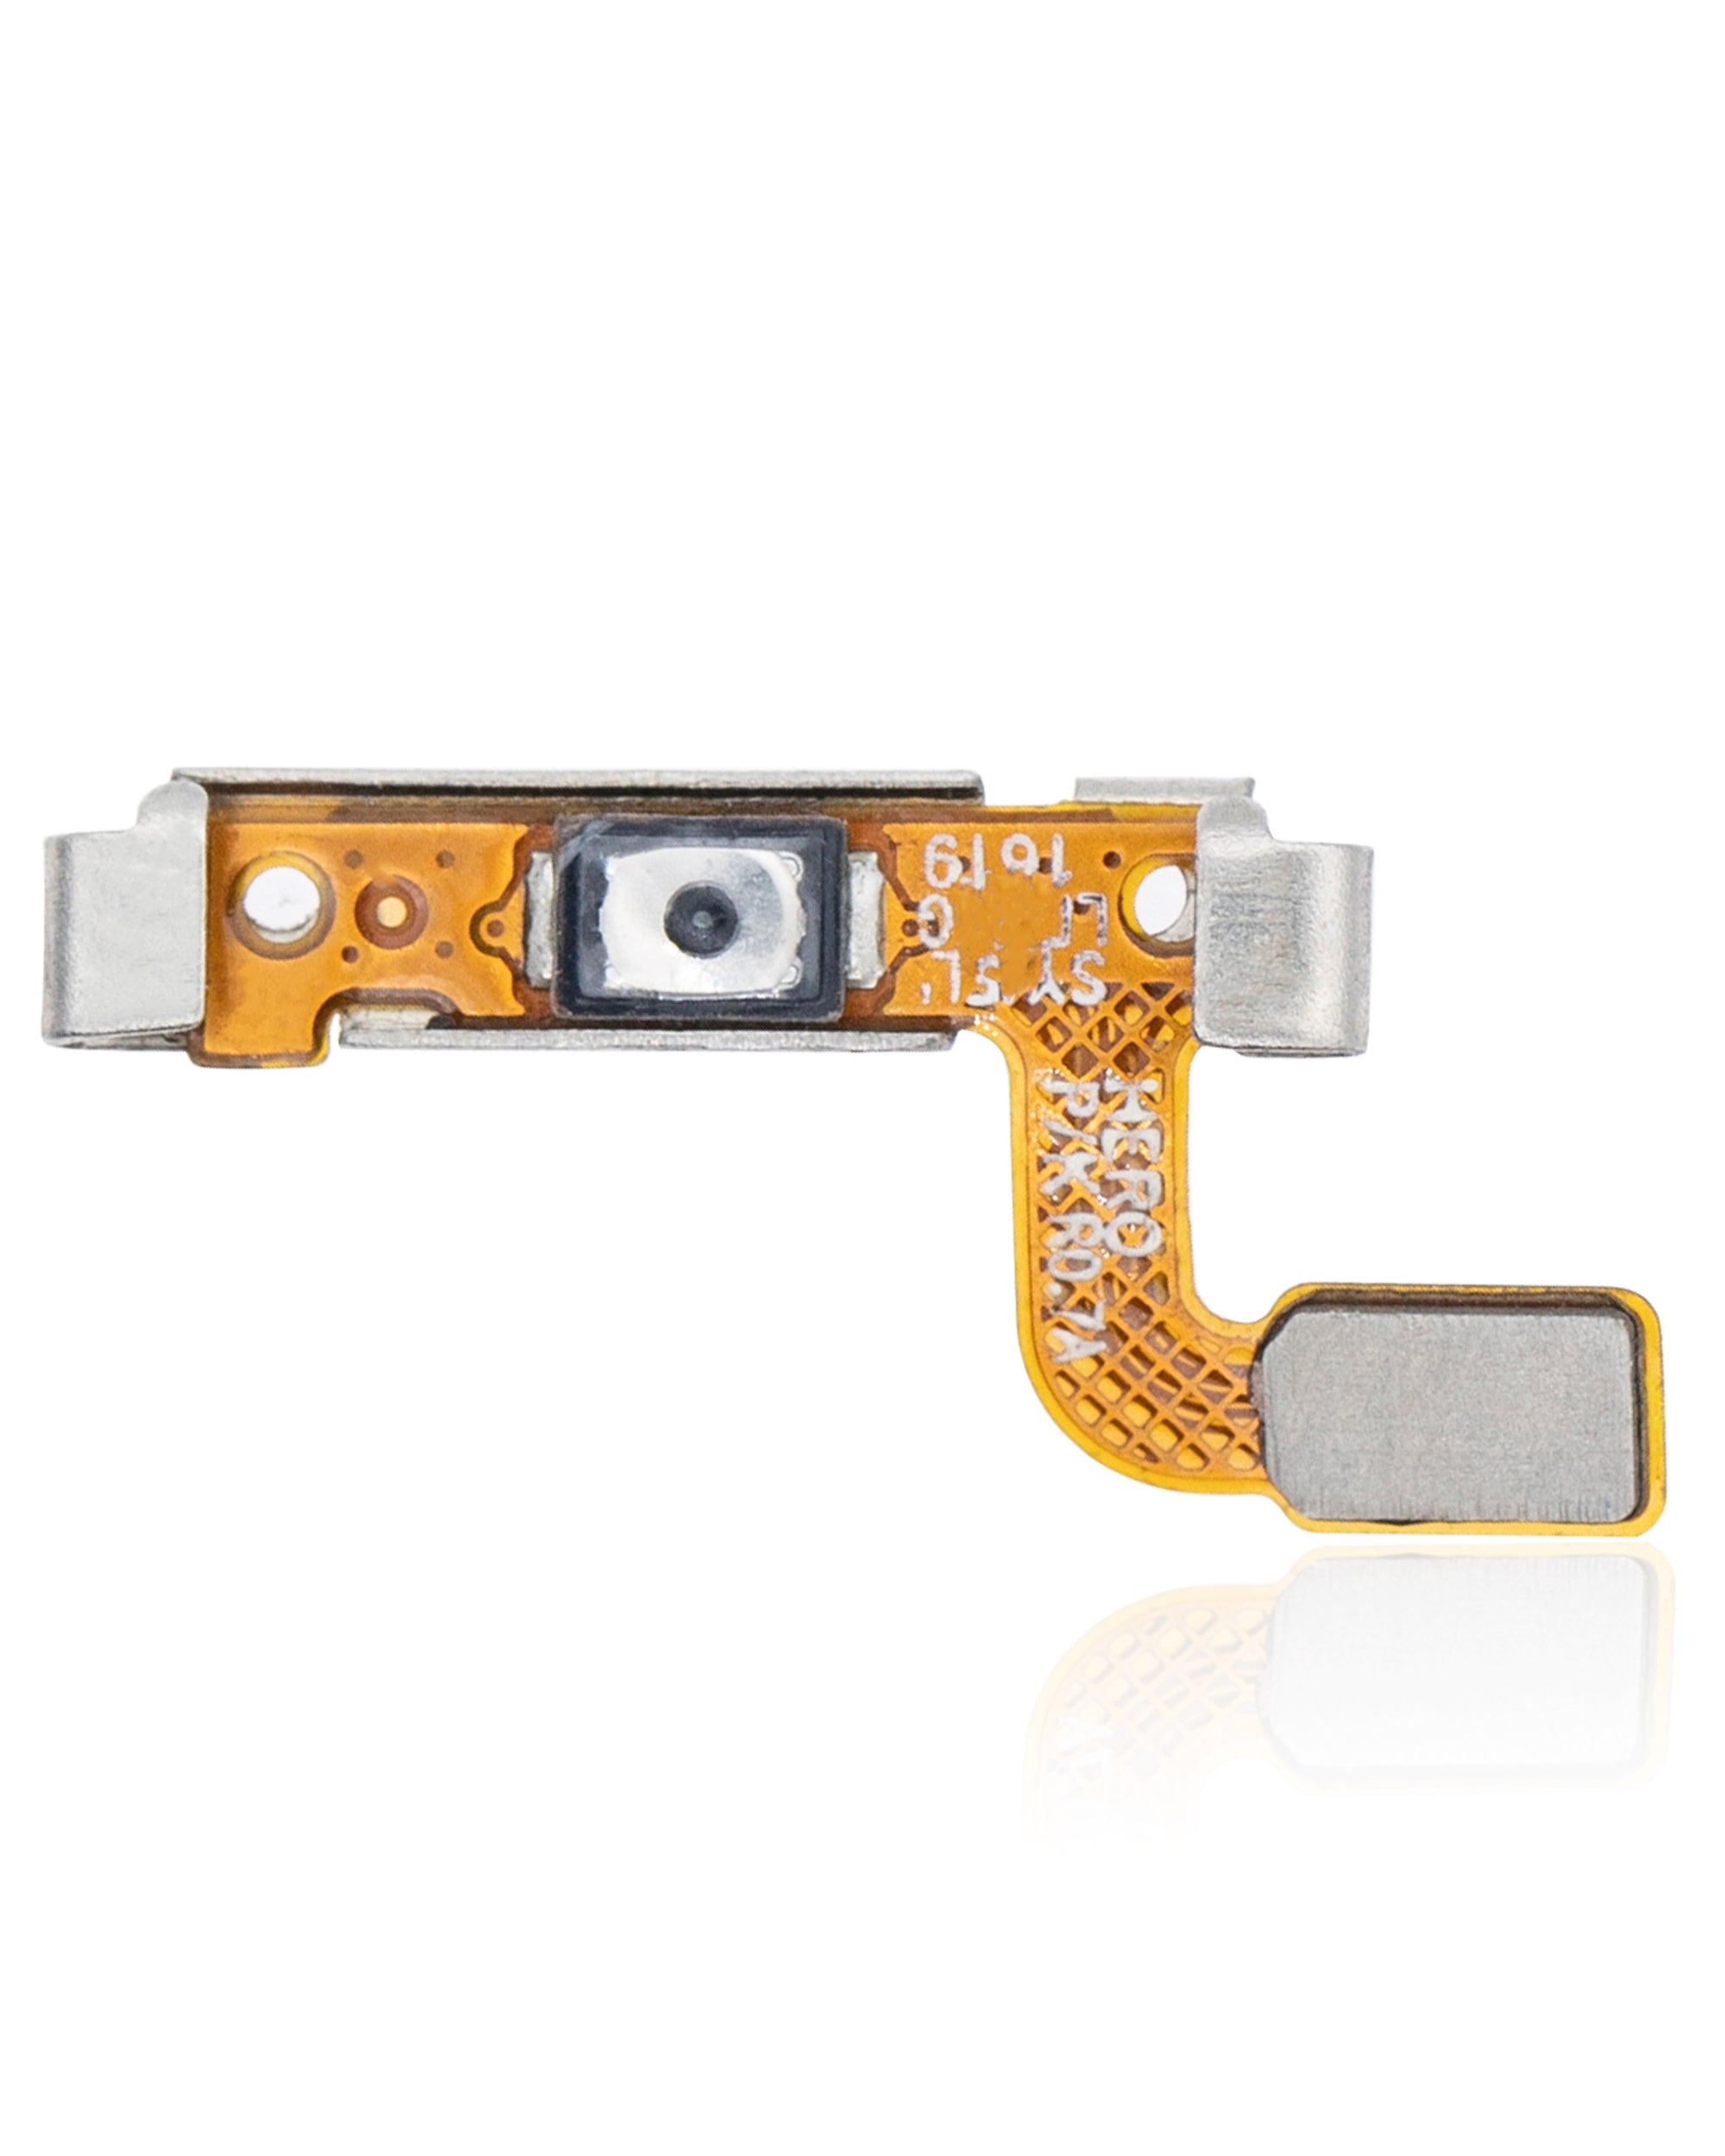 For Samsung Galaxy S7 / S7 Edge Power Button Flex Cable Replacement